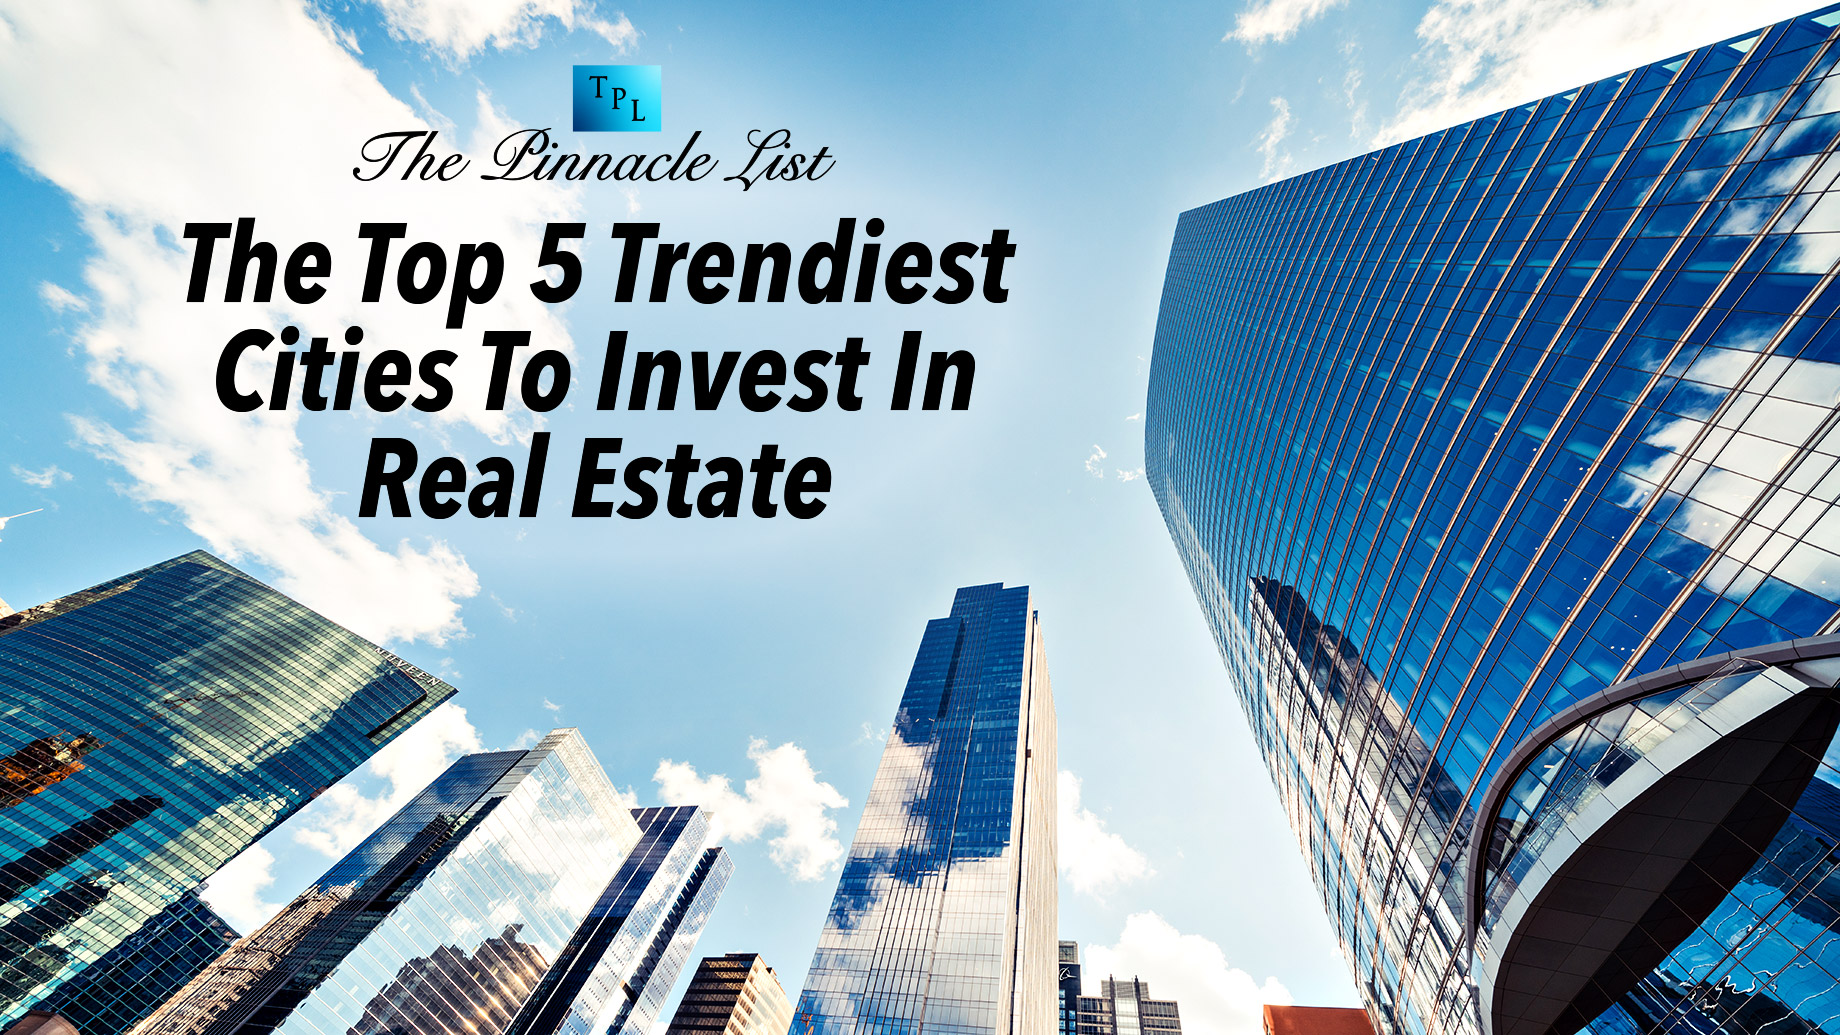 The Top 5 Trendiest Cities To Invest In Real Estate